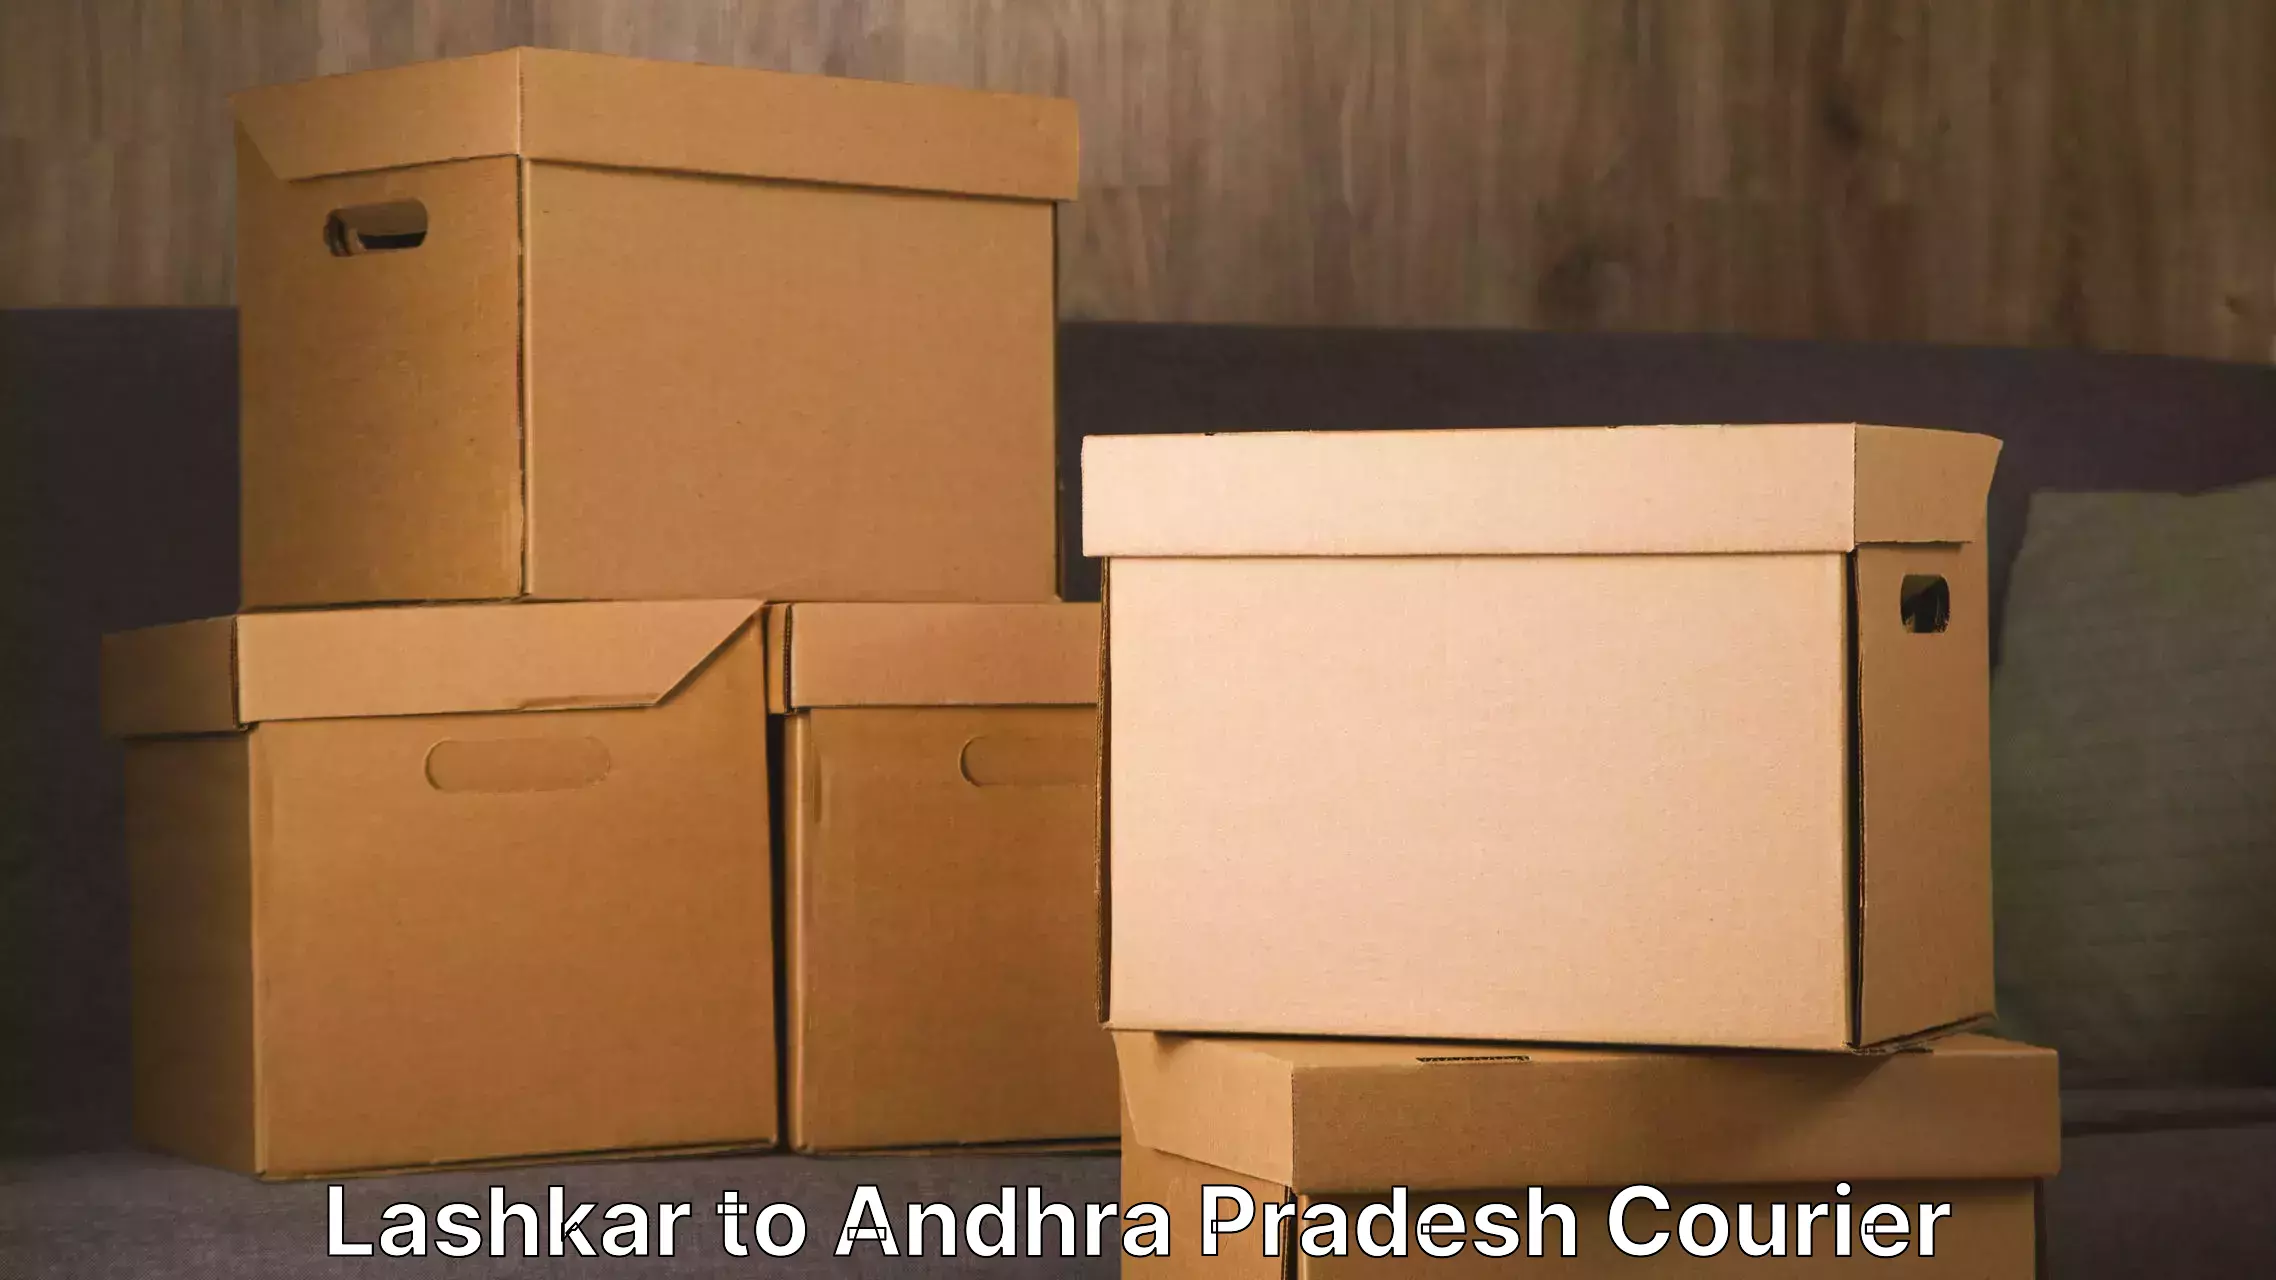 Professional packing services in Lashkar to Visakhapatnam Port